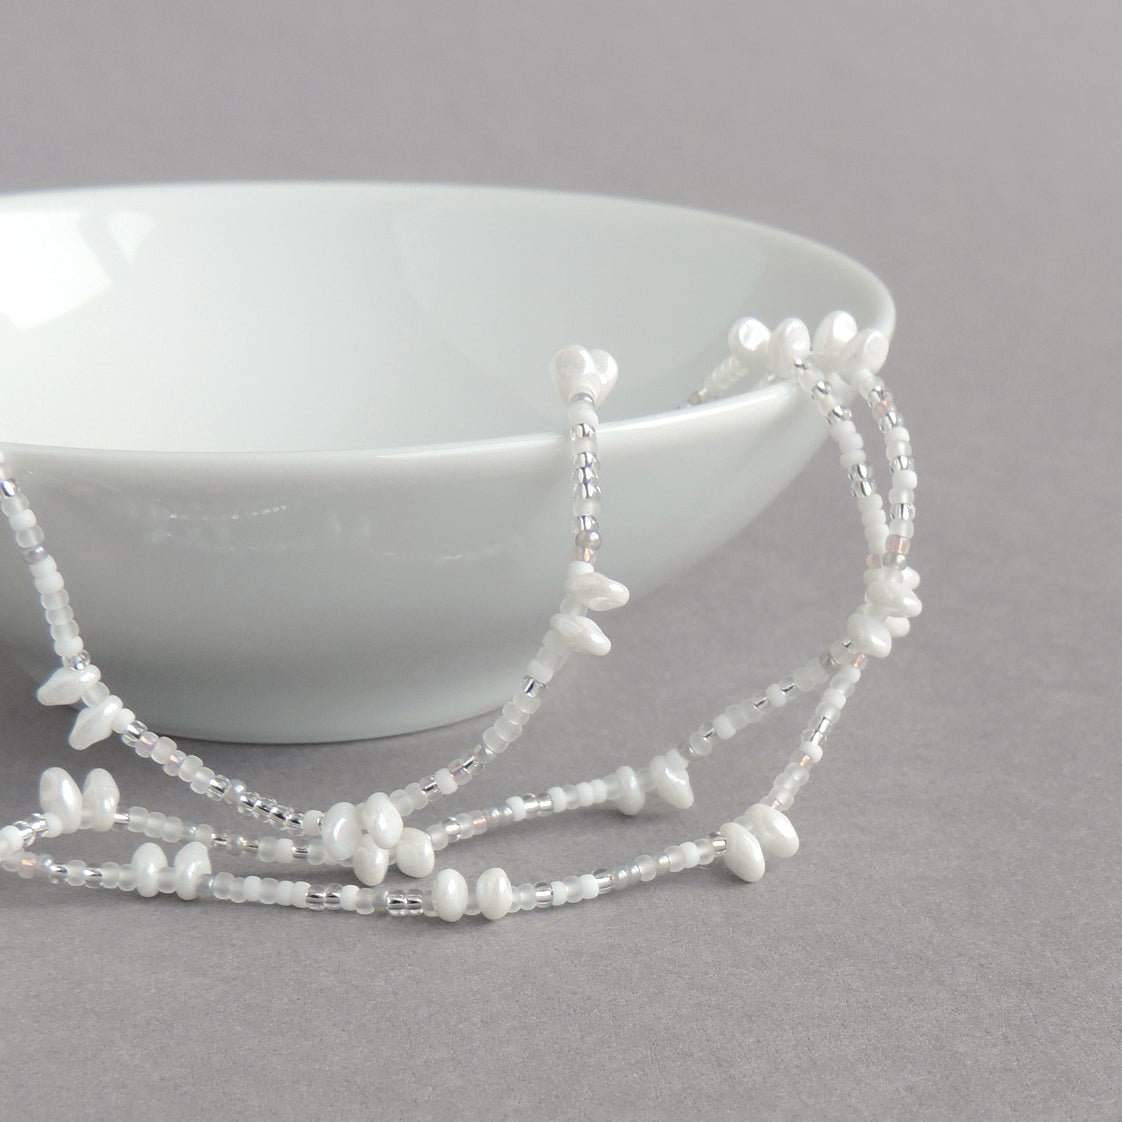 Long beaded white necklace